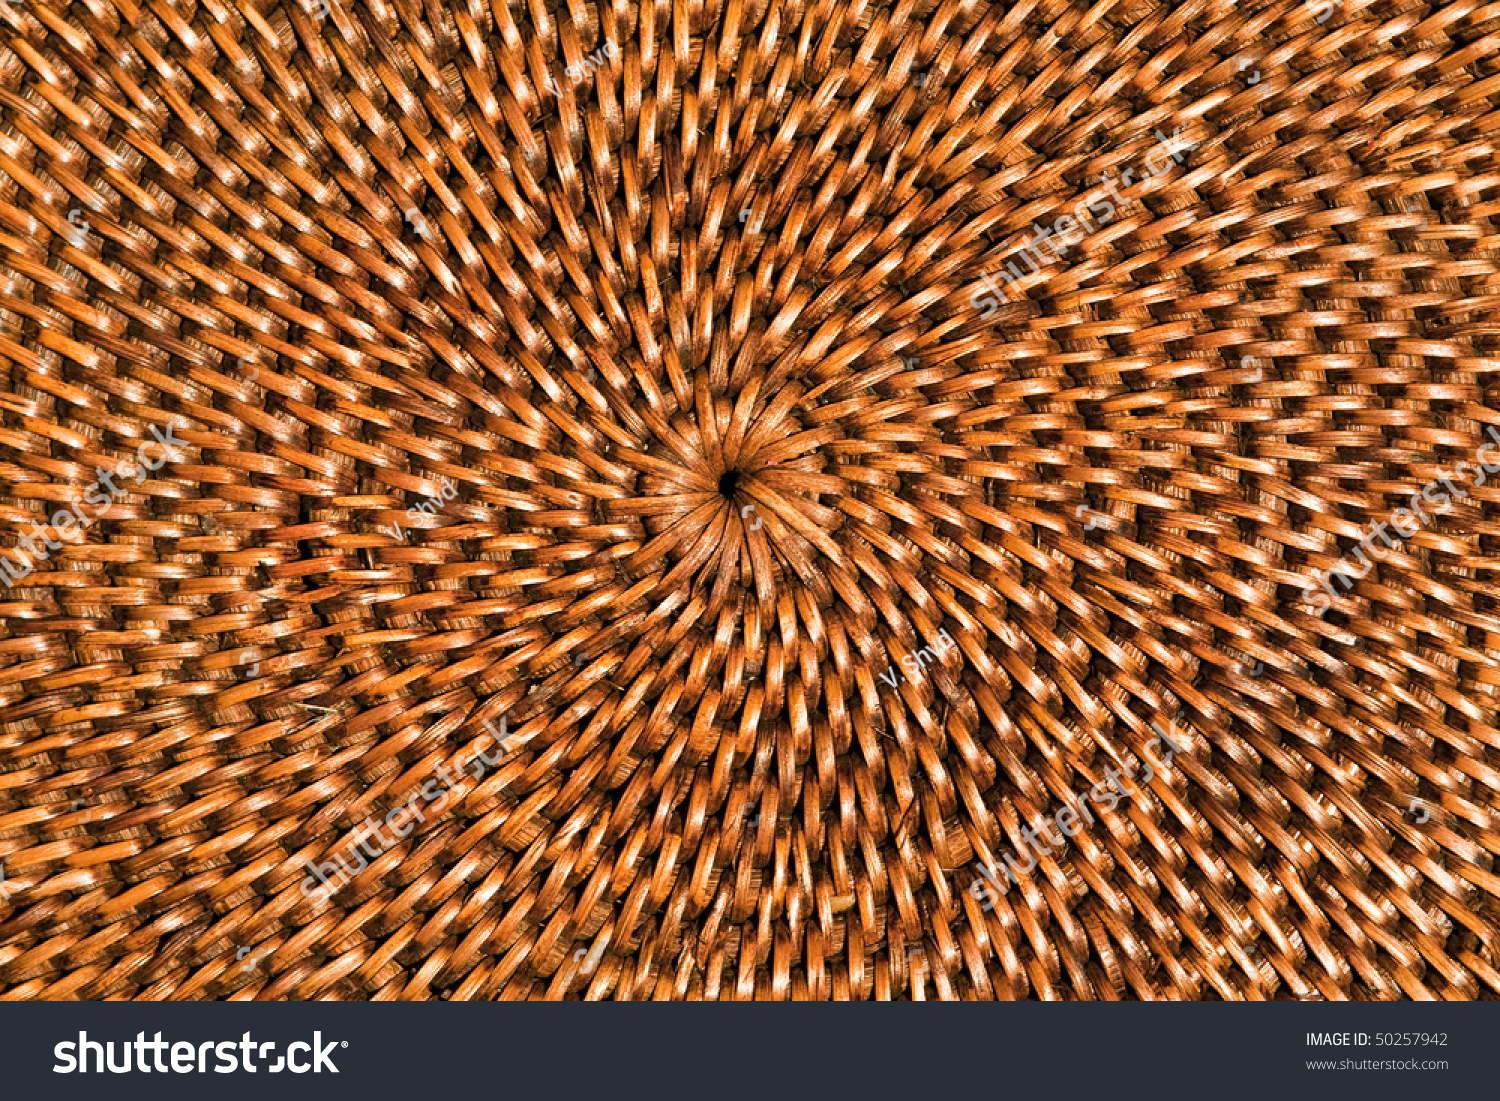 Wood Texture Of A Wicker Basket, Close Up Stock Photo ...